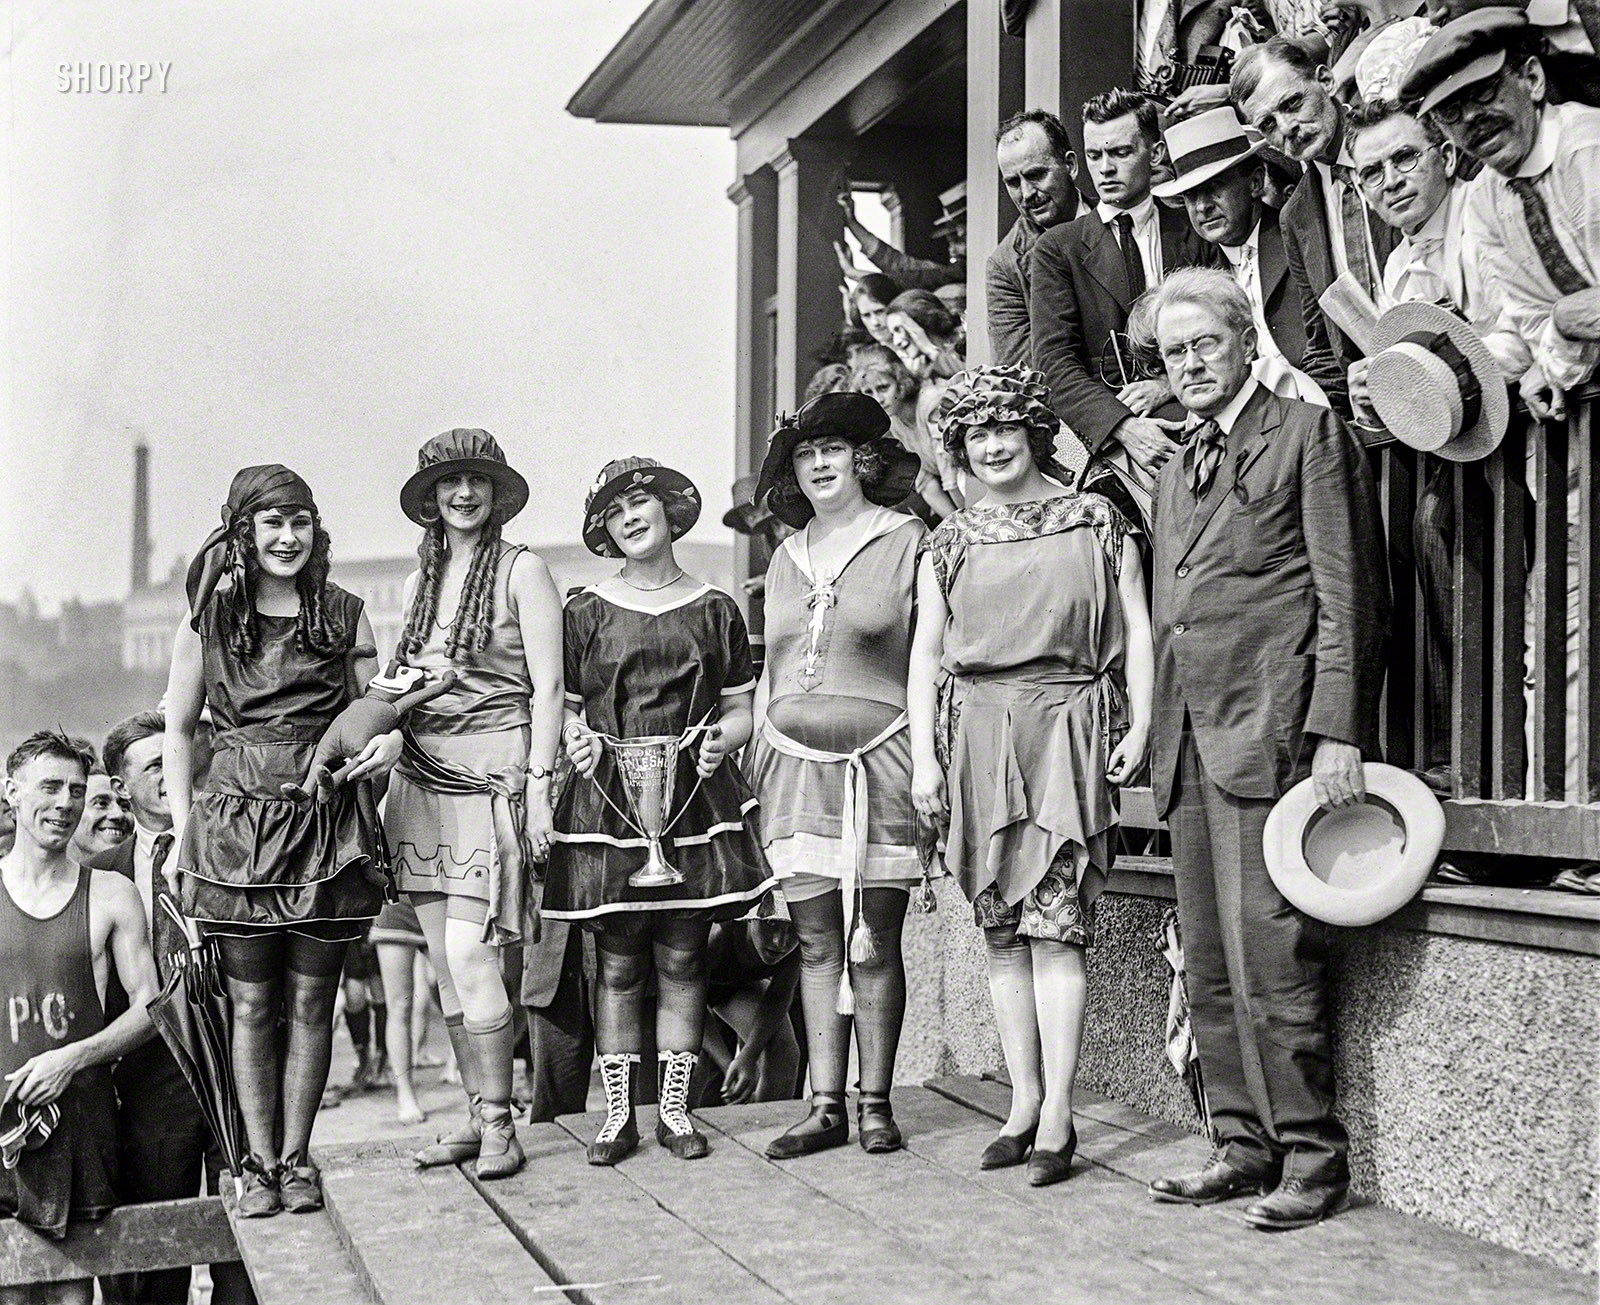 Lansburgh Girls Win Style Prize
Five Models Gain Cup at
Tidal Bathing Beach Costume Show.
&nbsp; &nbsp; &nbsp; &nbsp; With five models displaying the most modern bathing costumes, Lansburgh & Brother won the prize cup at the first annual style show, held yesterday afternoon at the Tidal bathing beach. The models who represented Lansburgh's -- all local girls -- were Mary Lee, Iola Swinnerton, Thelma Spencer, Hattie Spencer and Julia Cunningham. The suits which they wore were special importations, brought to Washington for exhibition at this show ...
 -- Washington Post, 6/26/1921

Washington, D.C., 1921. "Bathing Beach costume contest." At left we have Iola Swinnerton, First Lady of Shorpy in perpetuum; the others are plebeian ciphers spared total invisibility only by the grace of her luminous beauty. View full size.